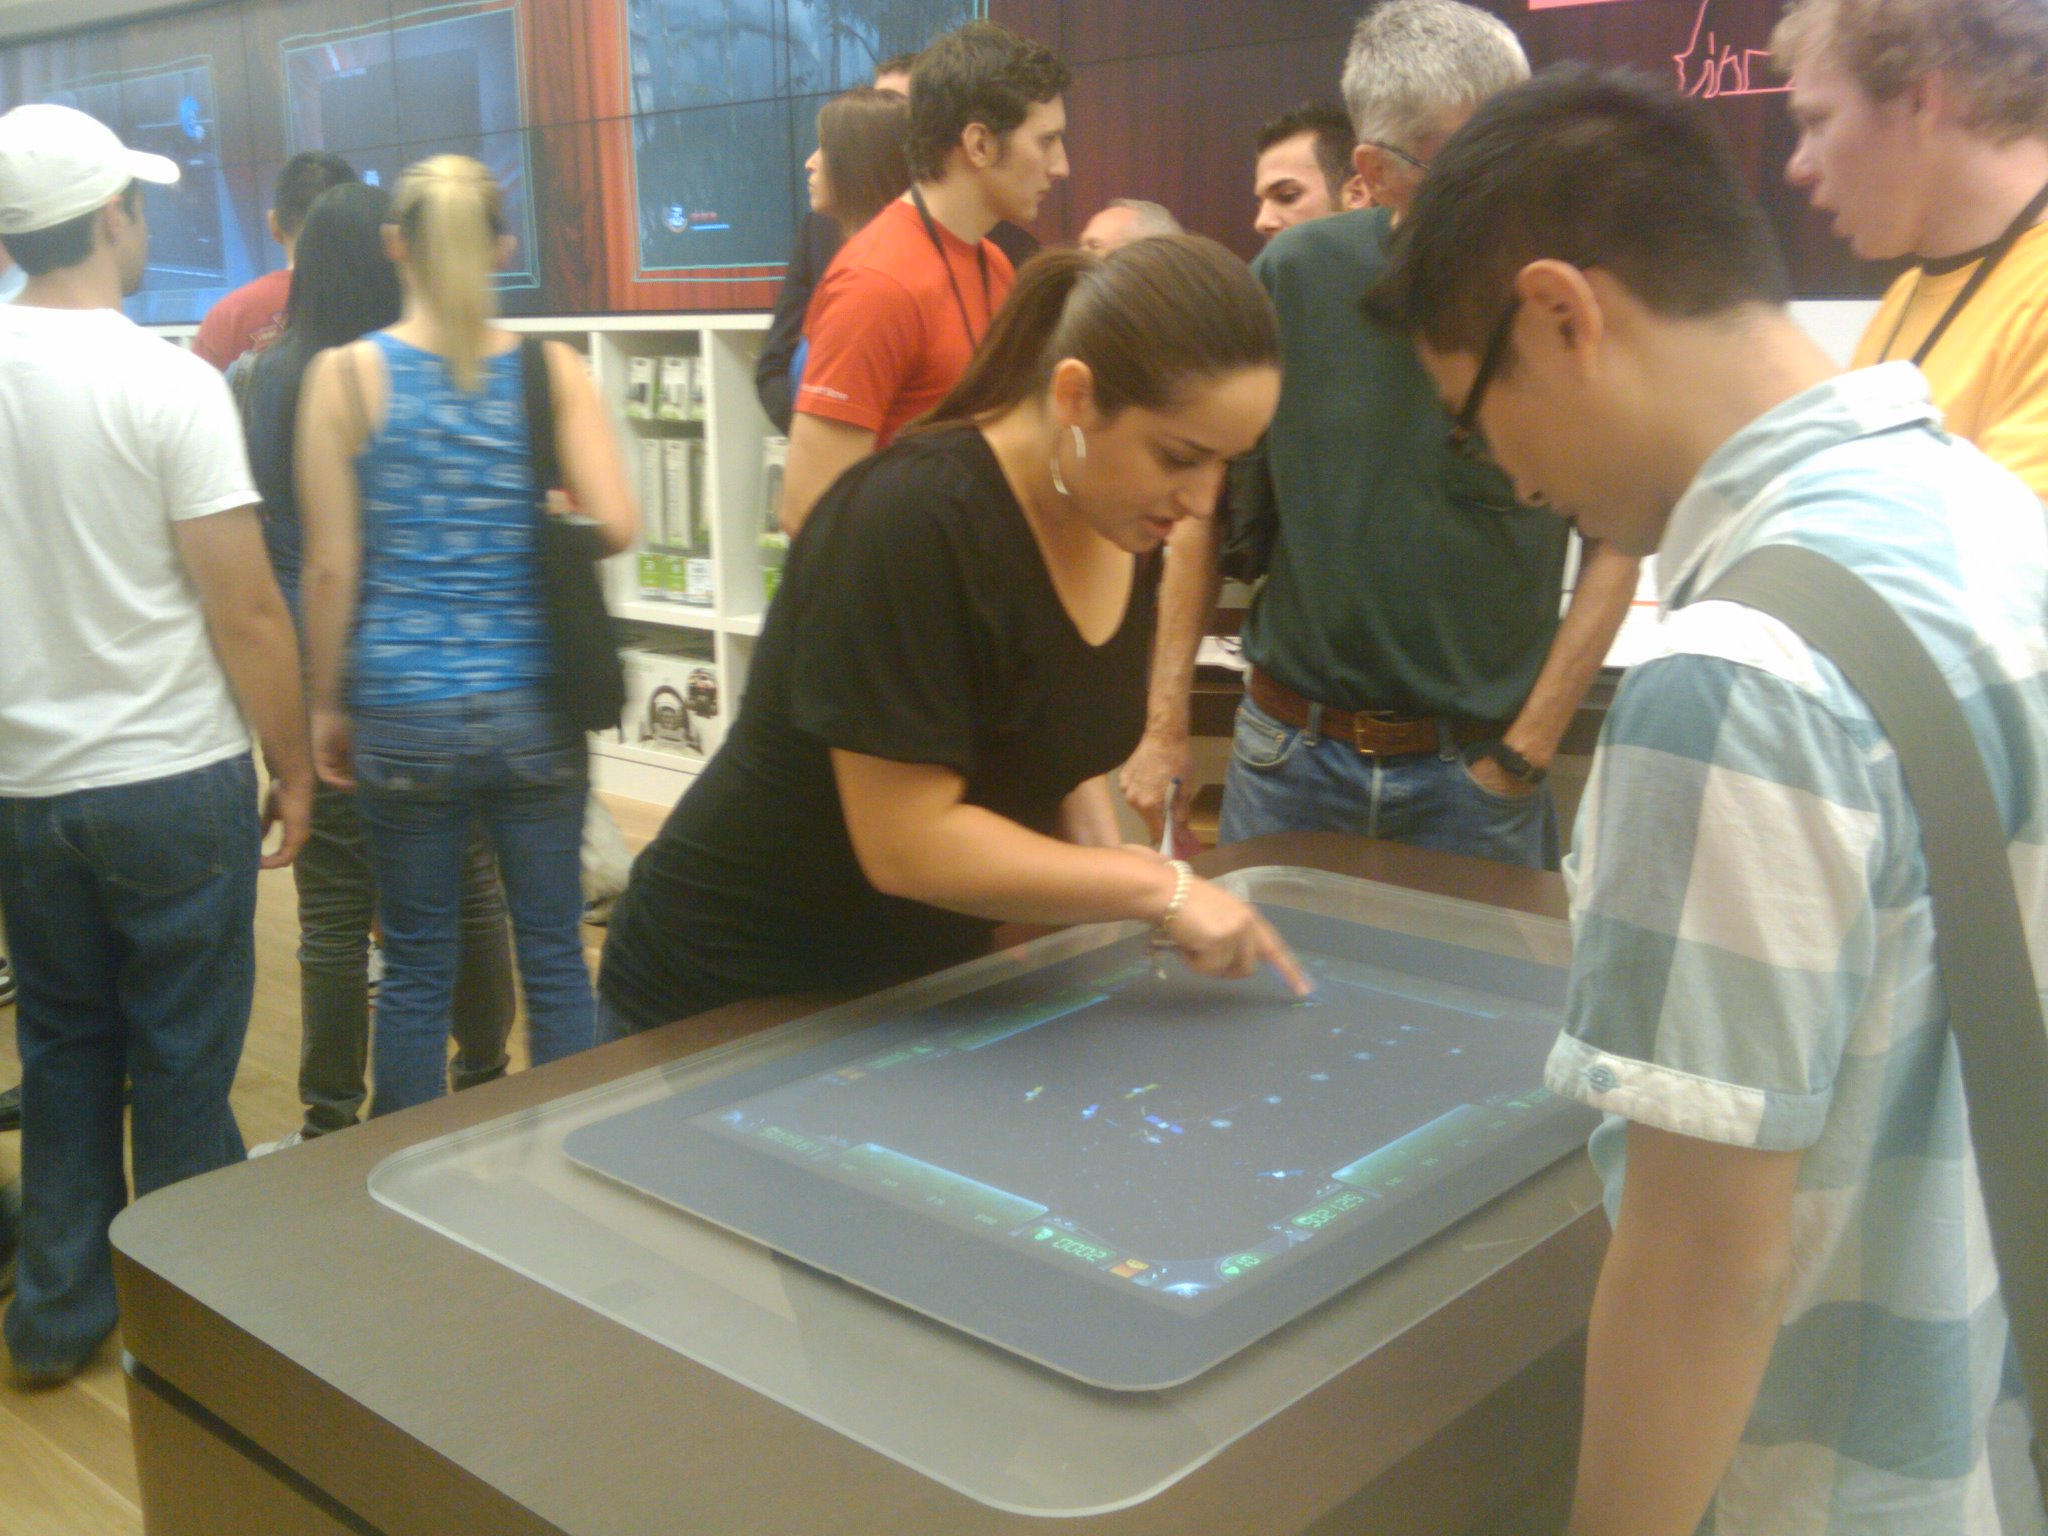 People playing with Surface (there were at least 2 others to play with too).